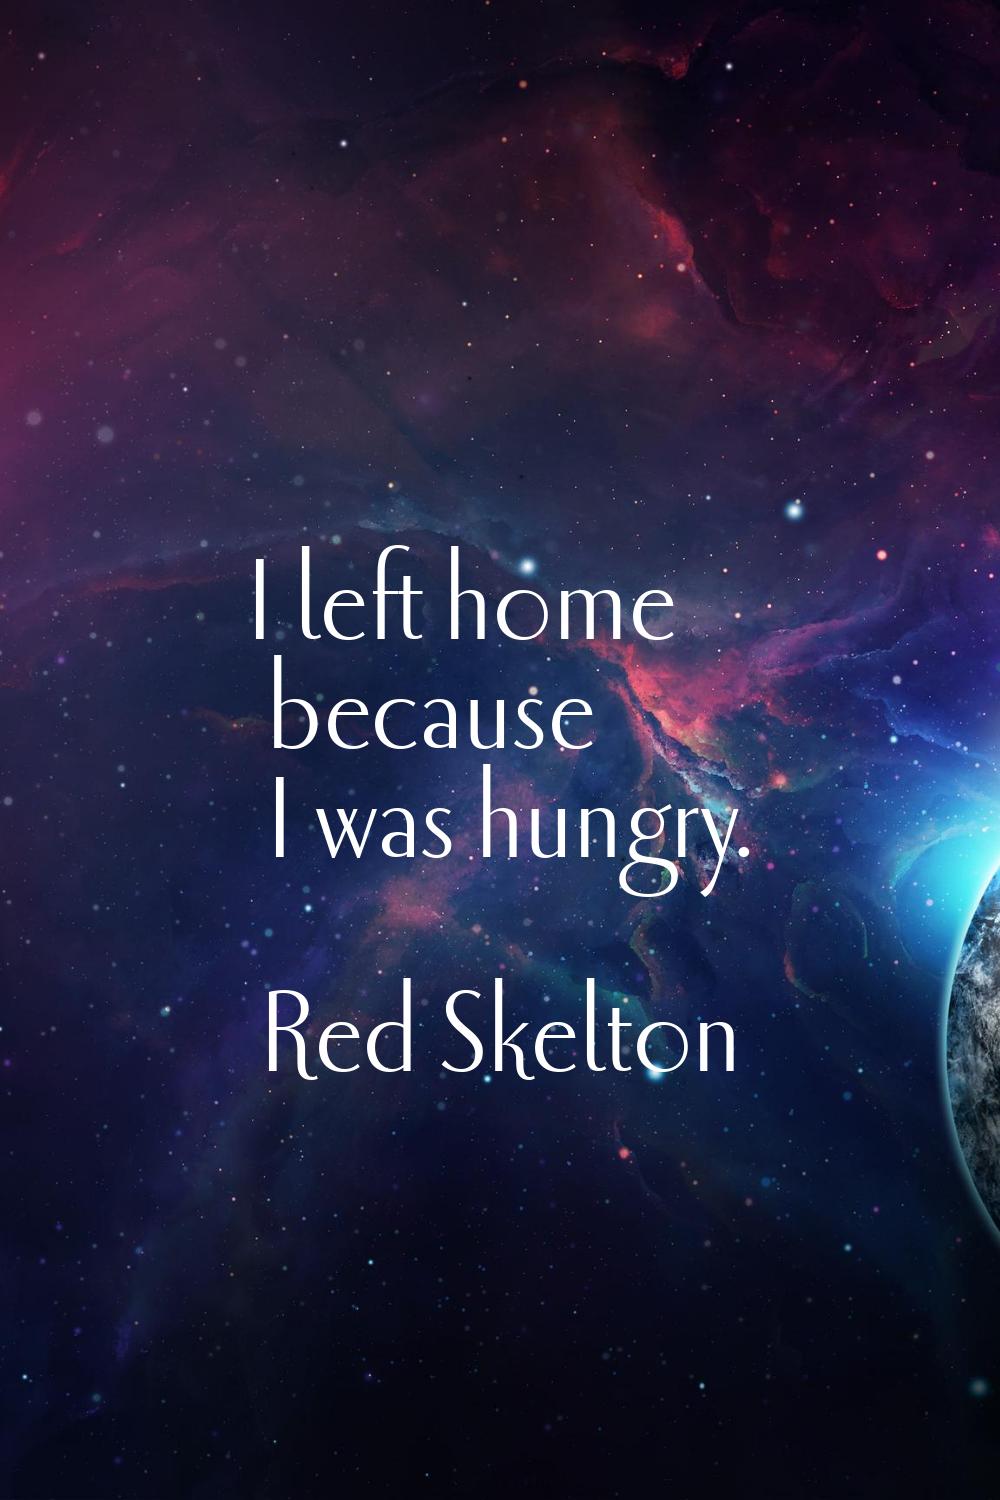 I left home because I was hungry.